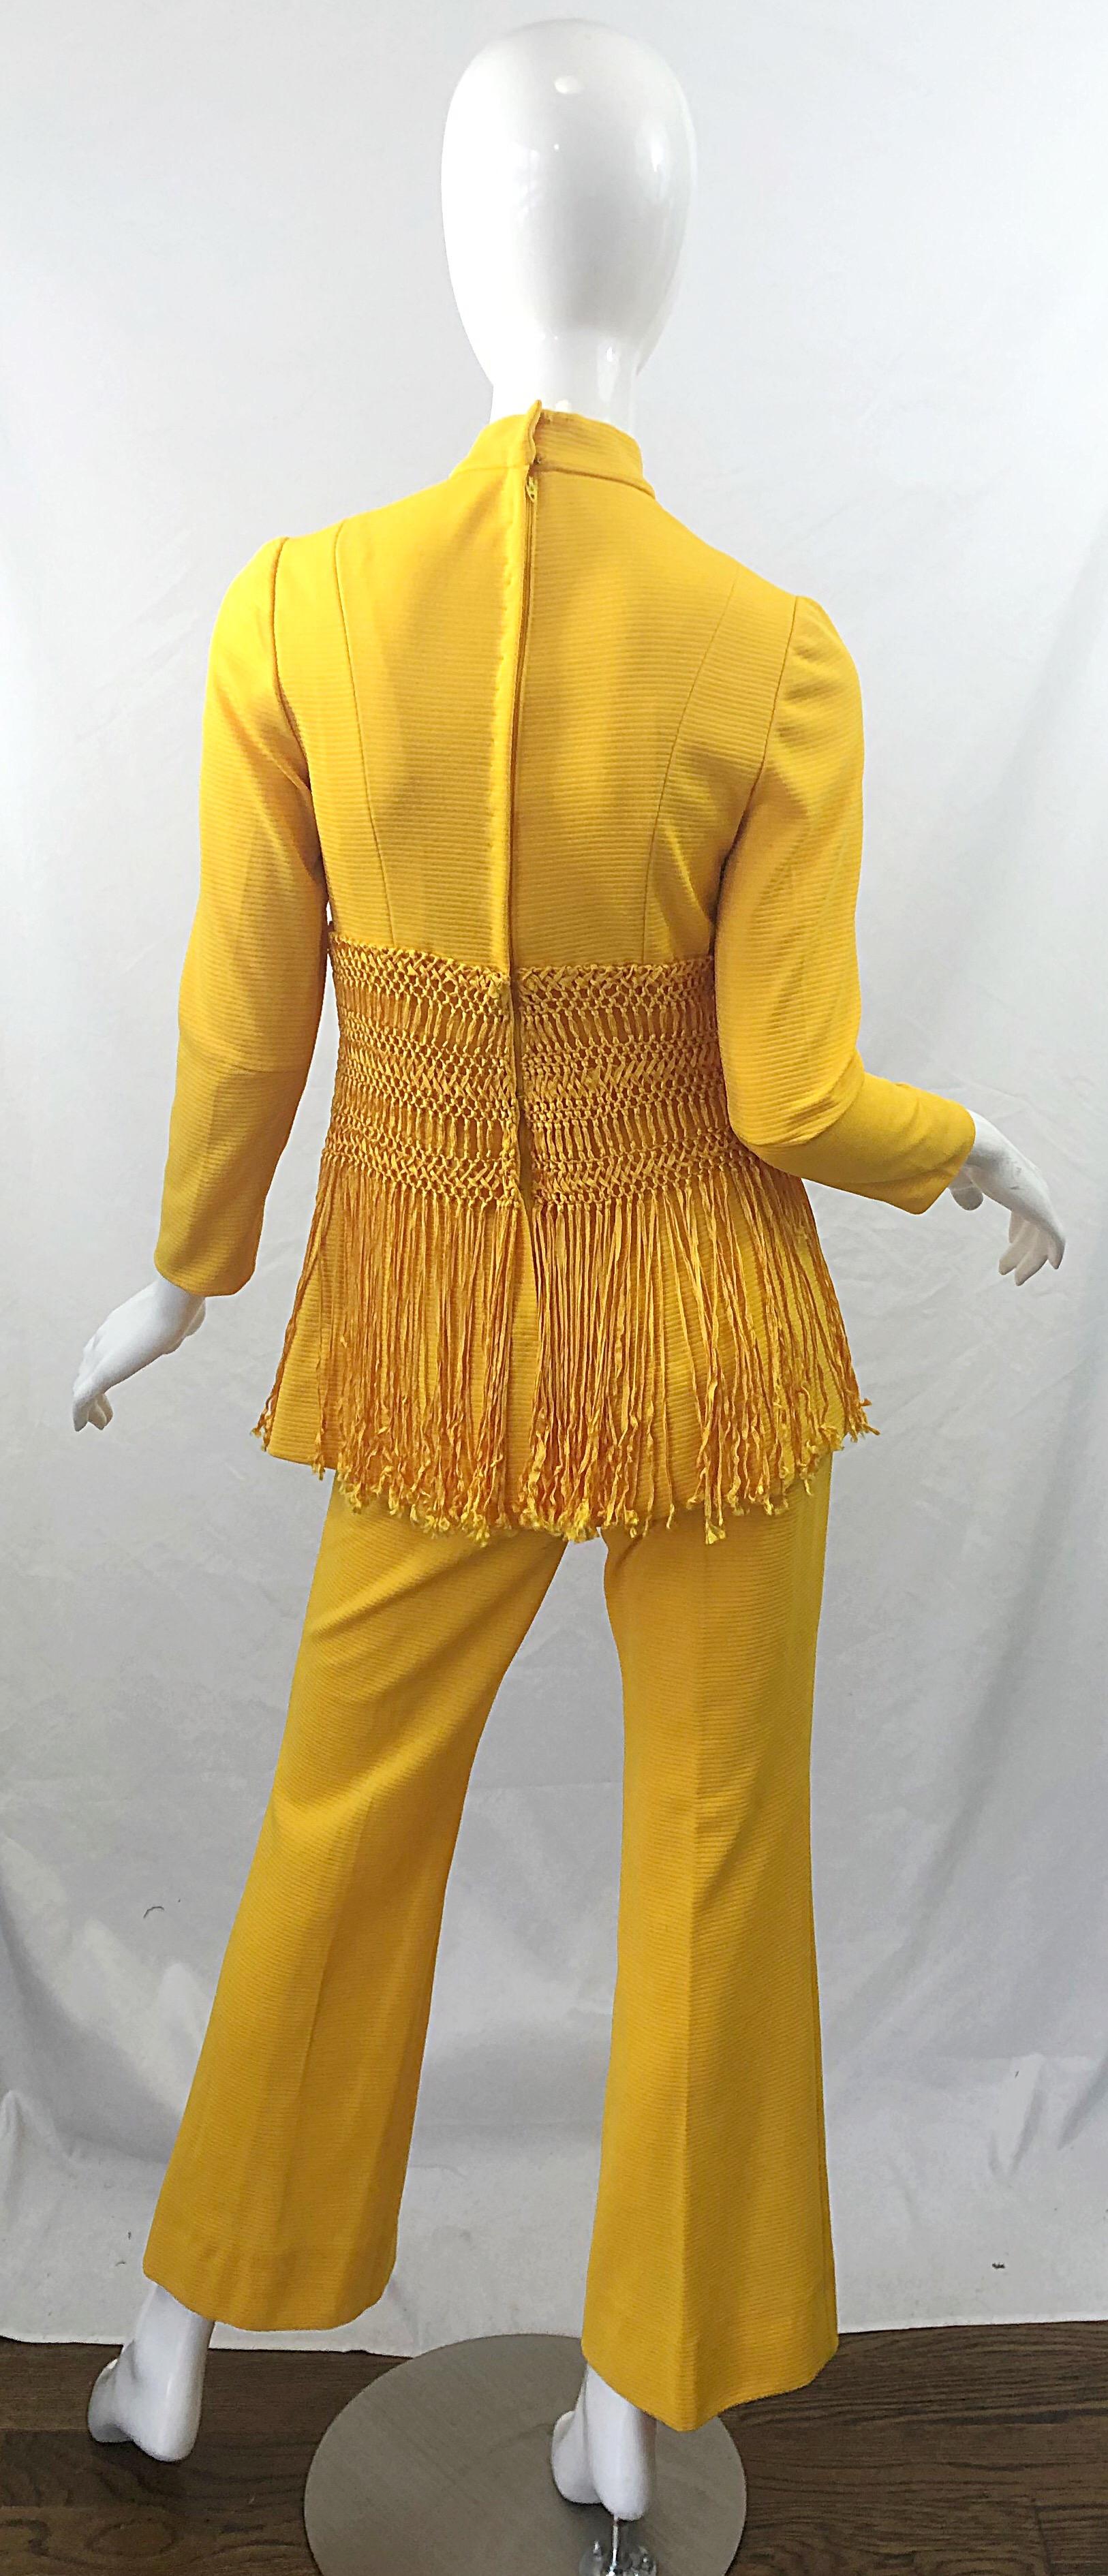 1970s Canary Yellow Fringe Vintage Knit Tunic Top + 70s Bell Bottom Flared Pants 5